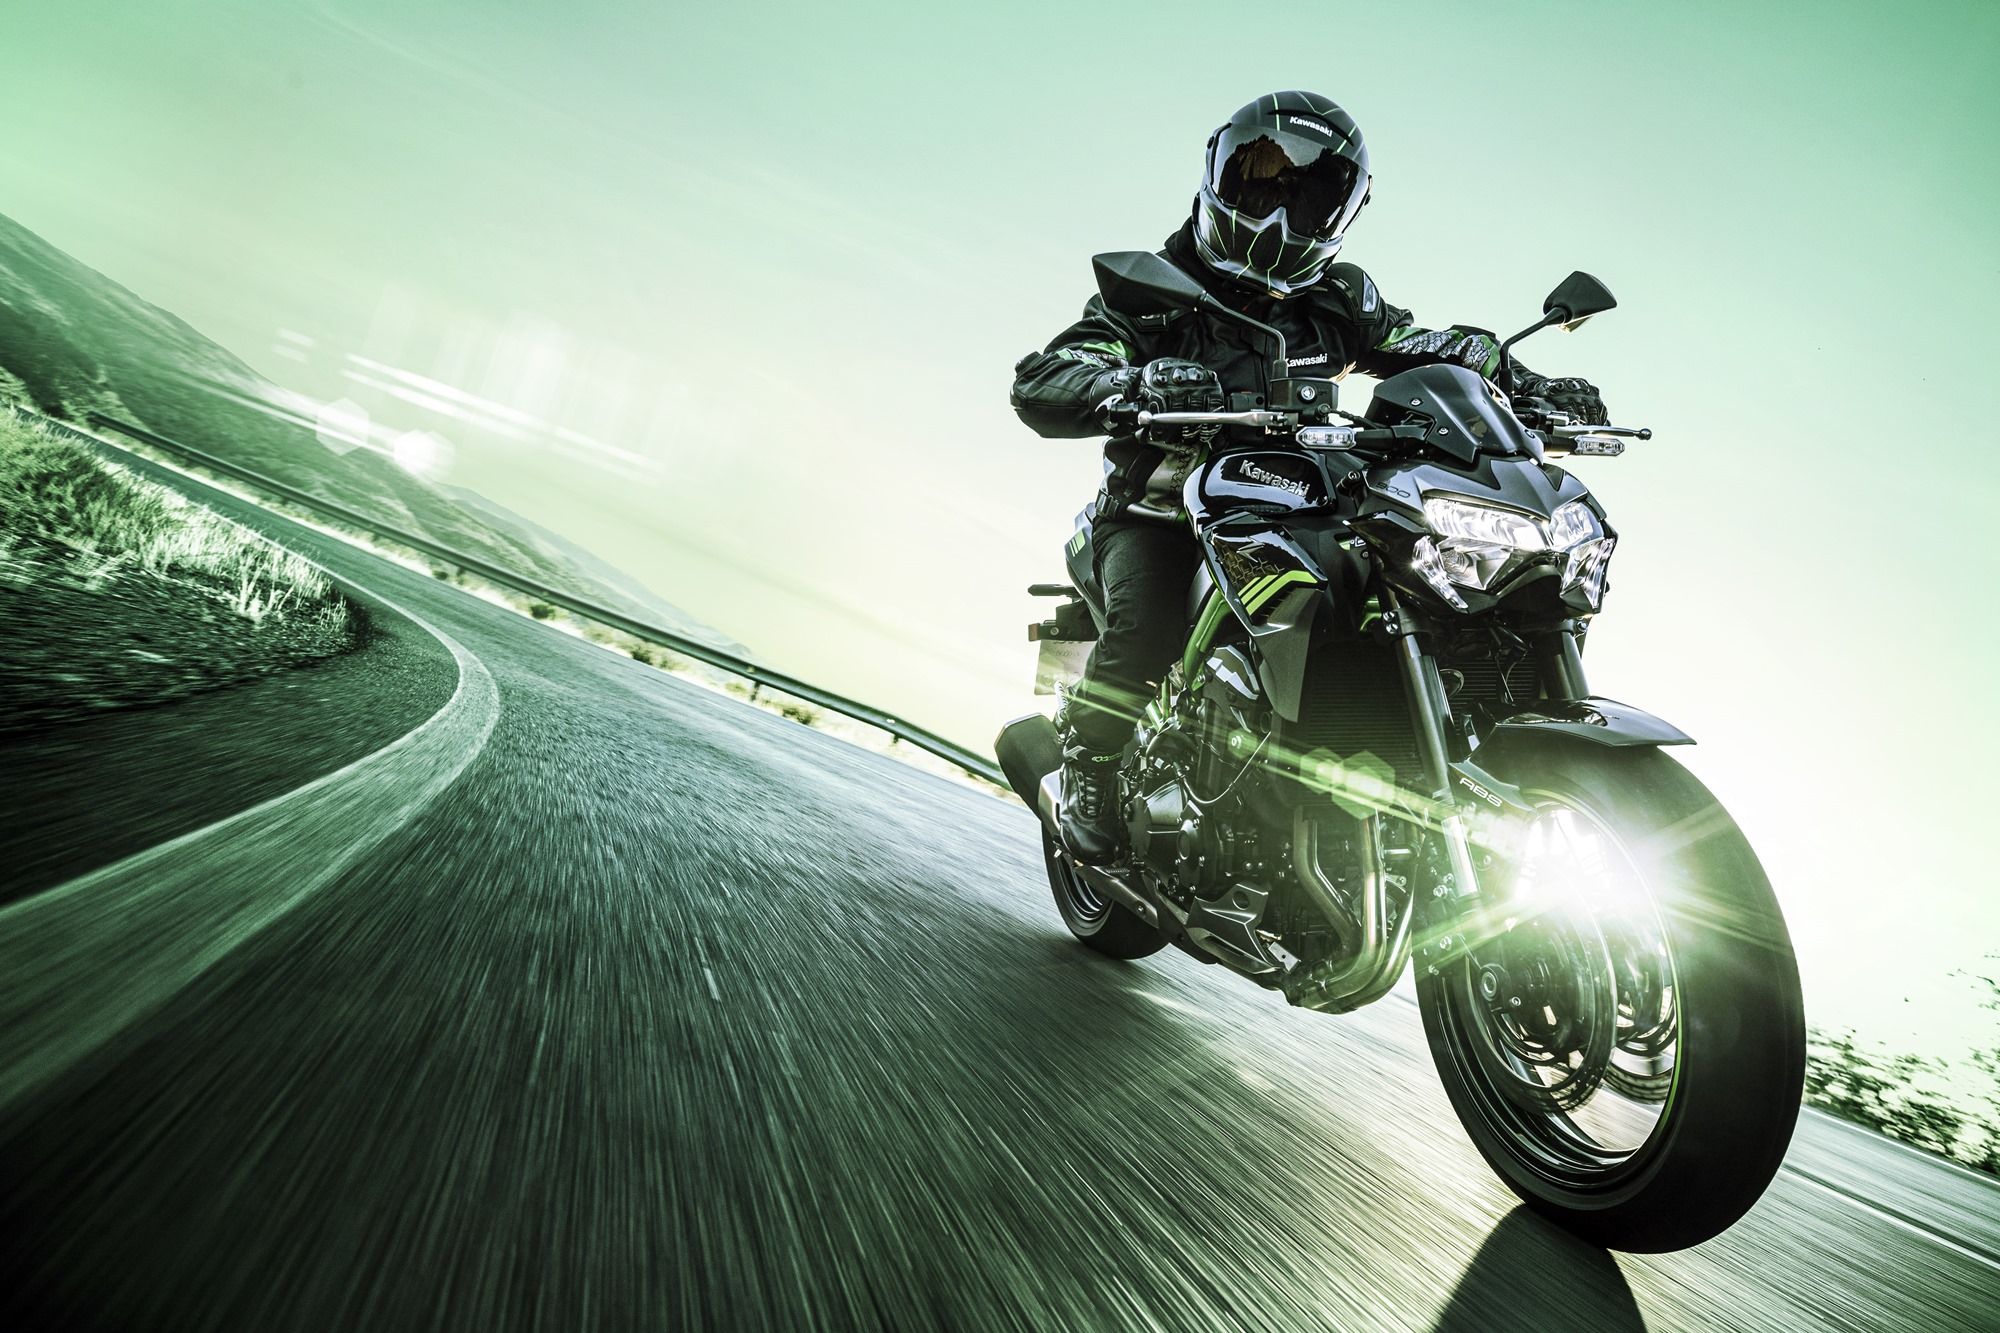 Updated Special Edition Kawasaki Z900 launched at Rs 7.99 lakh. IAMABIKER Motorcycle!